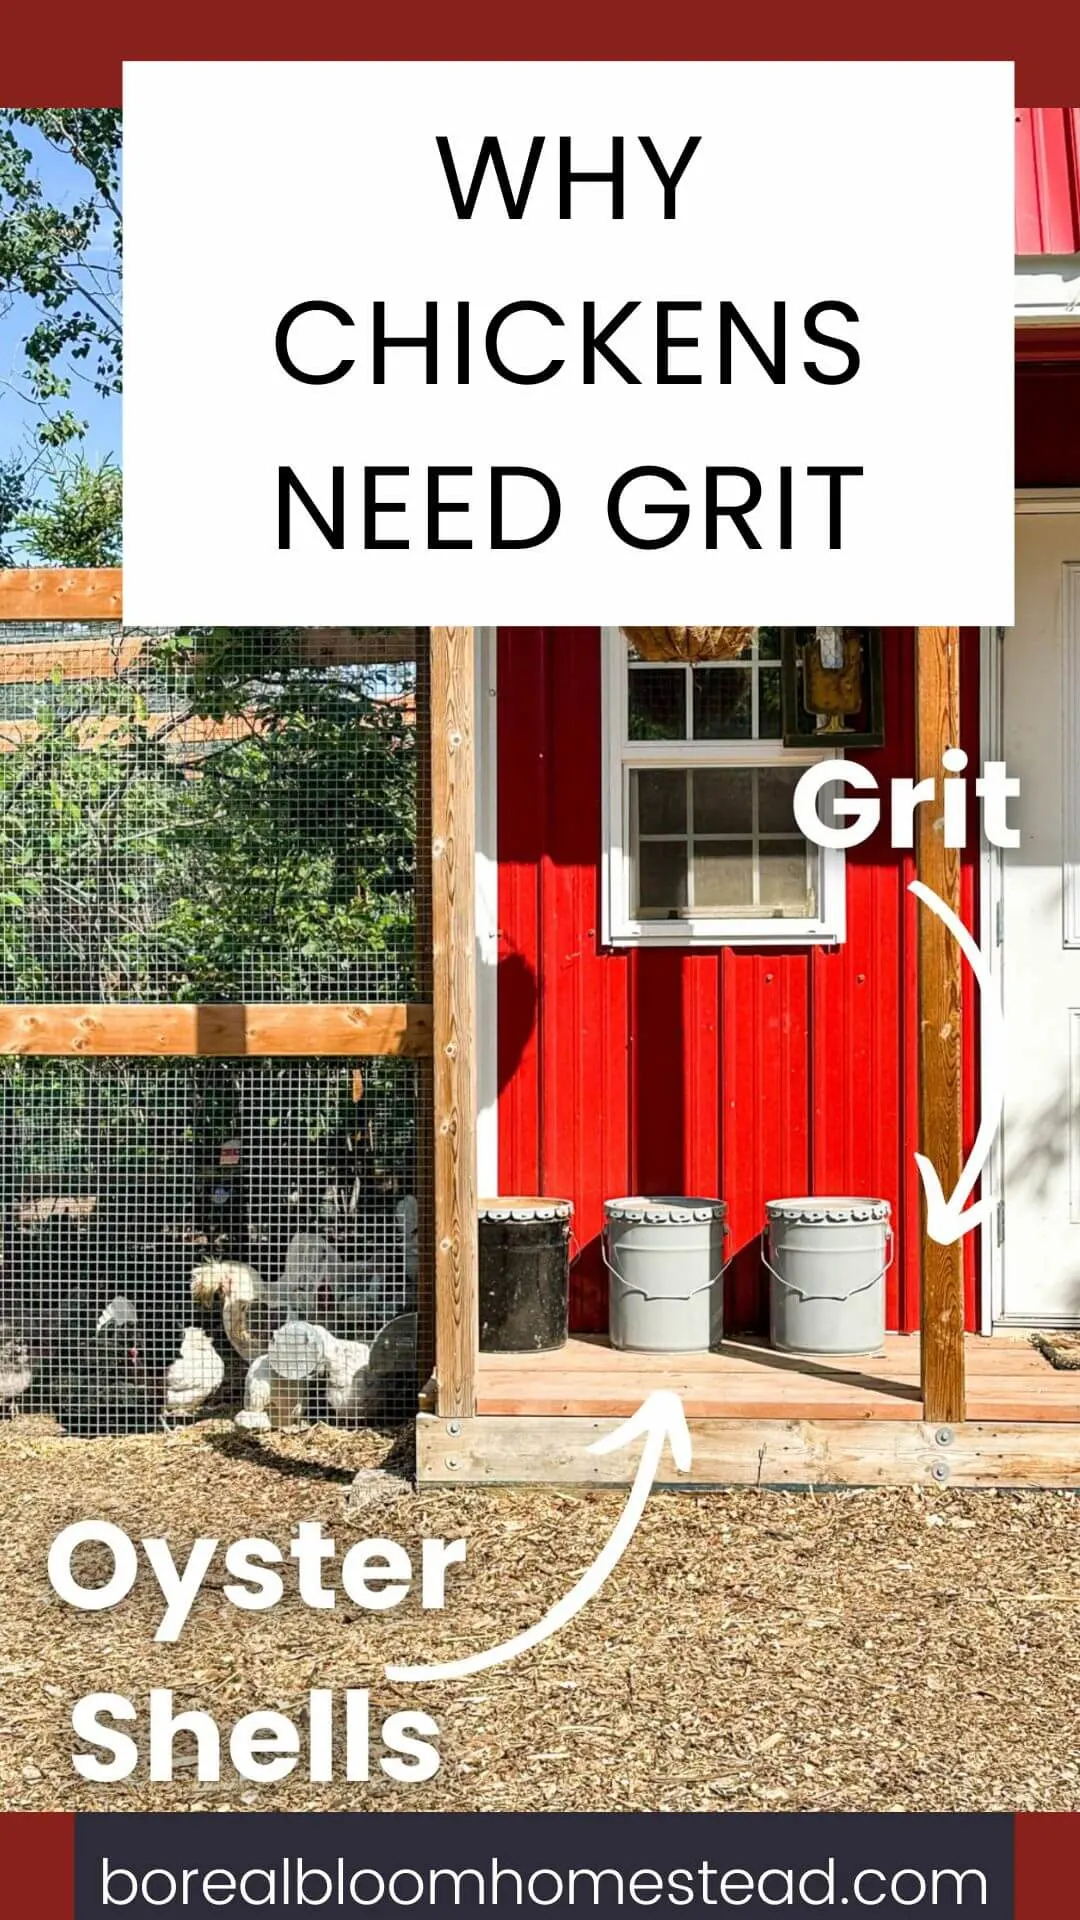 Red barn chicken coop with text overlay - why chickens need grit.